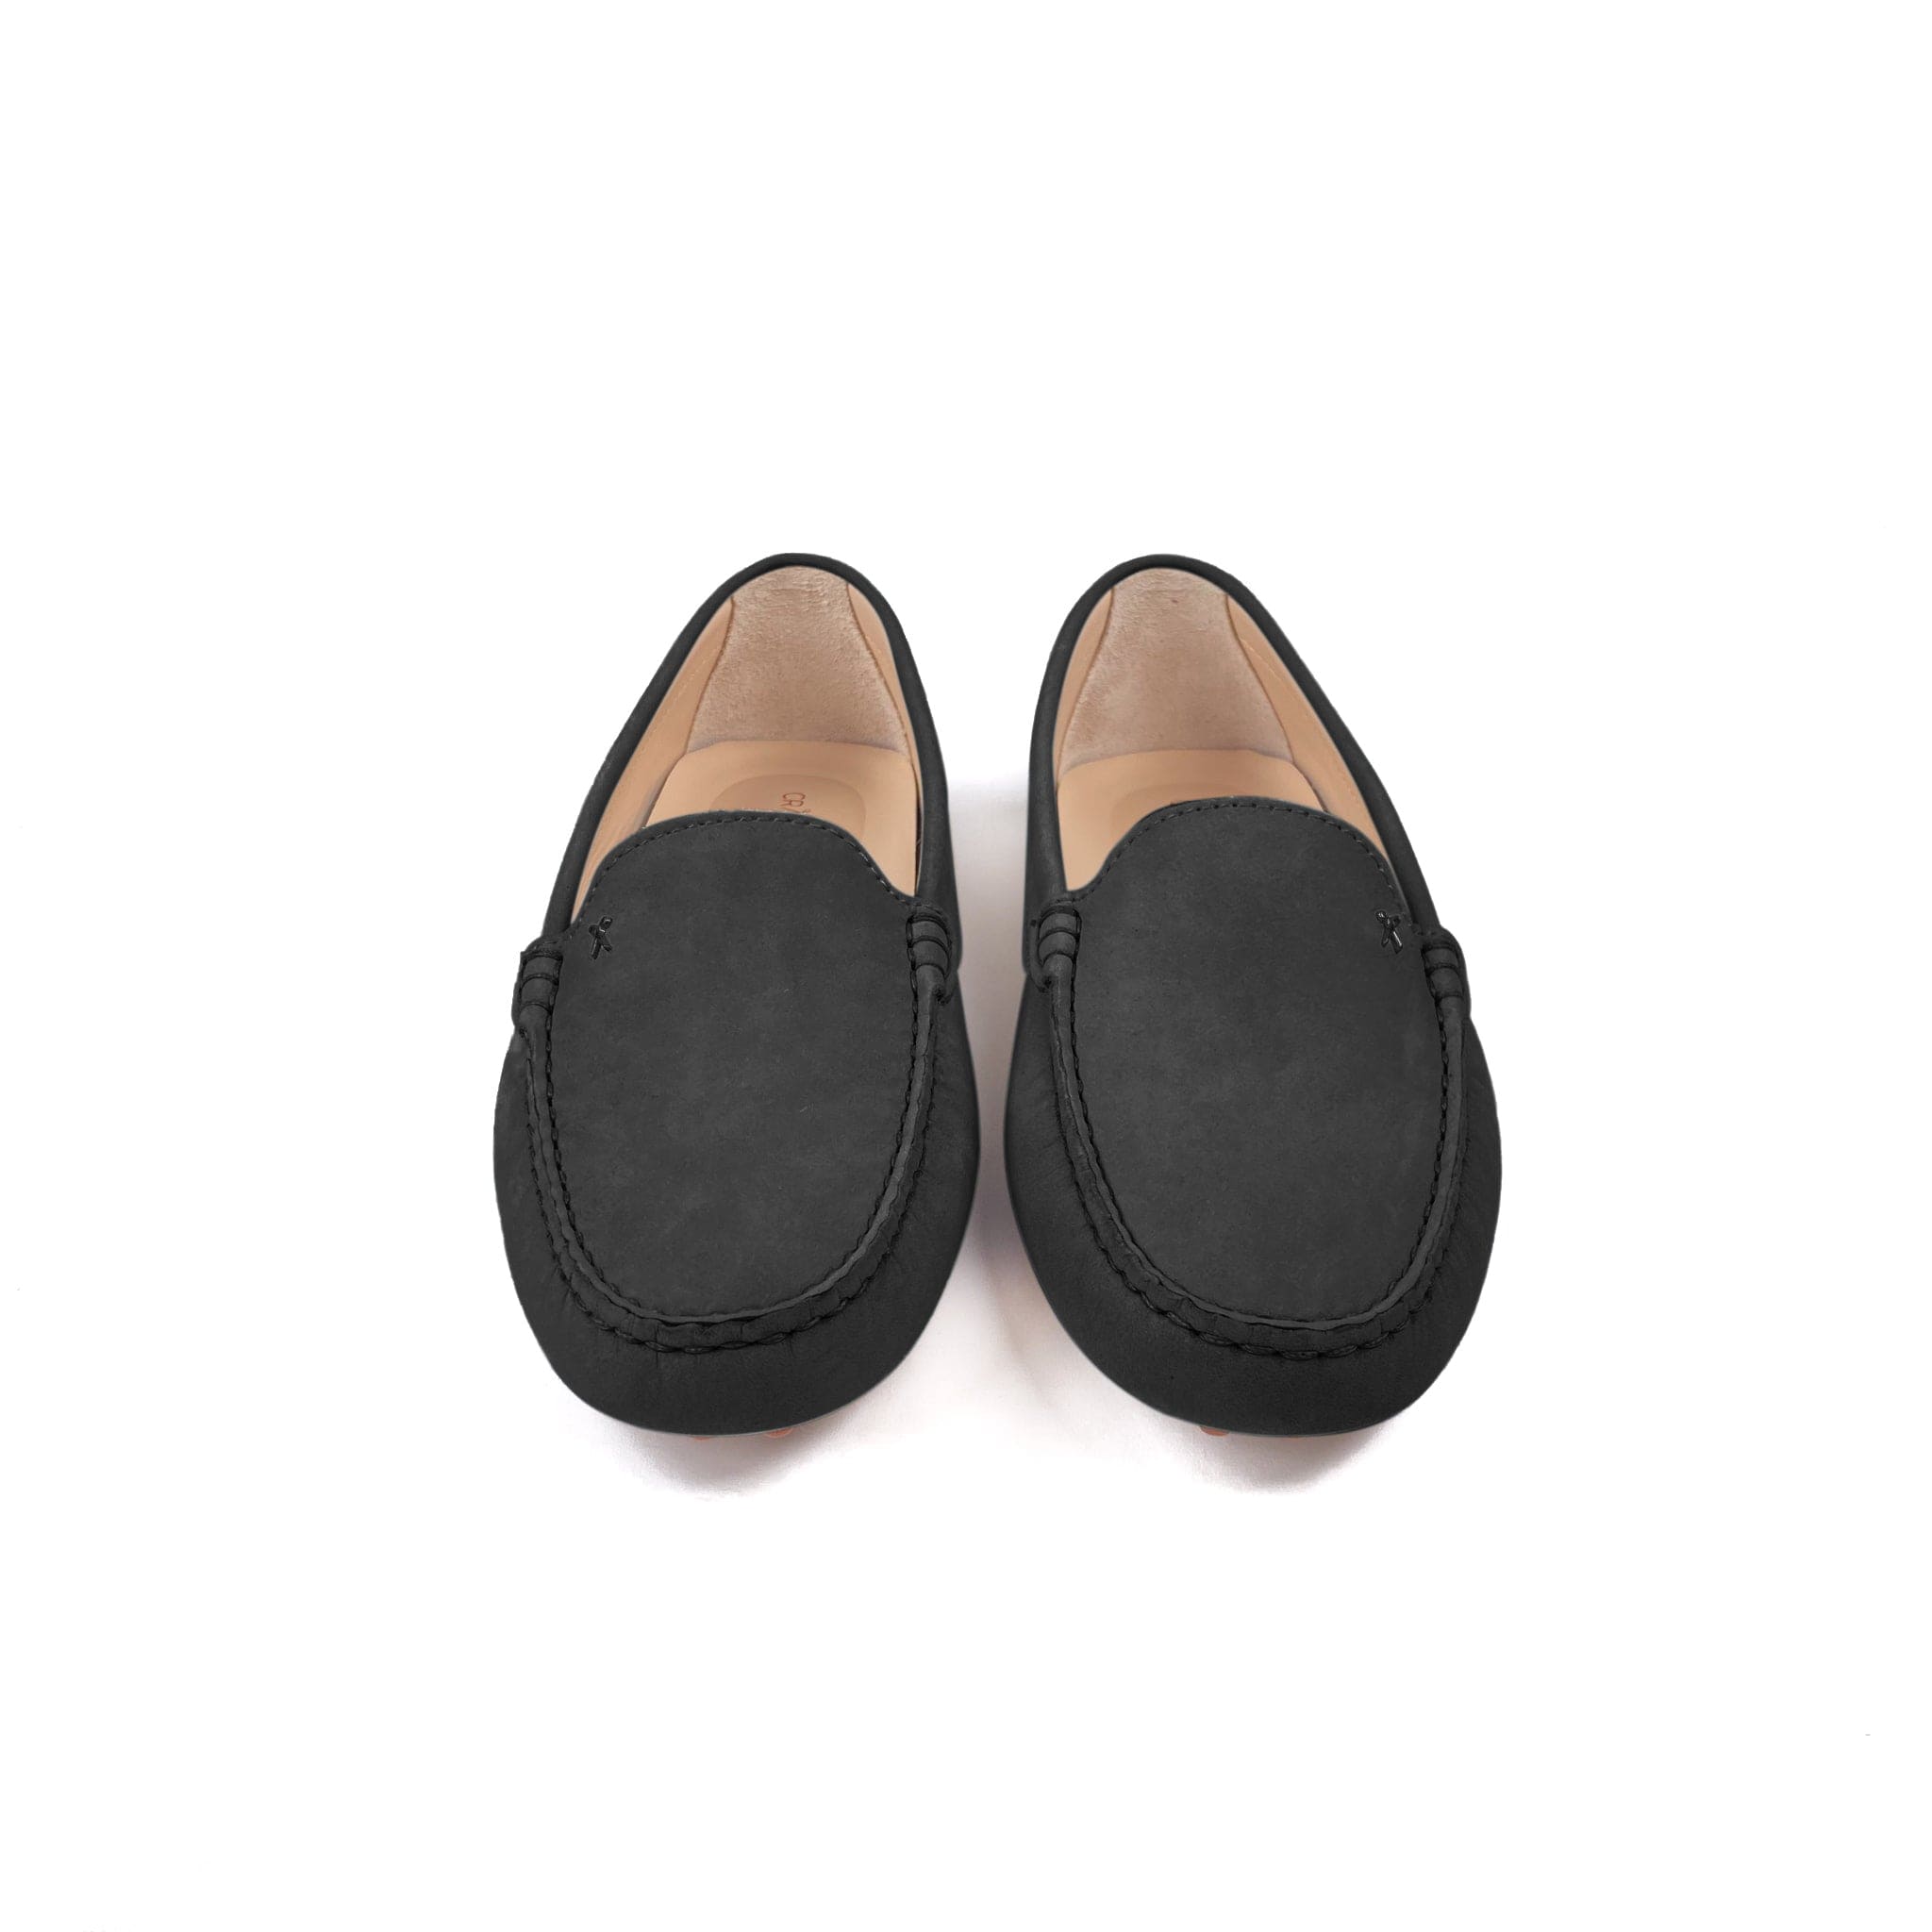 Driving shoe or moccasin in black italian nubuck leather with tan coloured calfskin lining. It has the iconic scissor on the right side of the vamp showing from the front on a white background